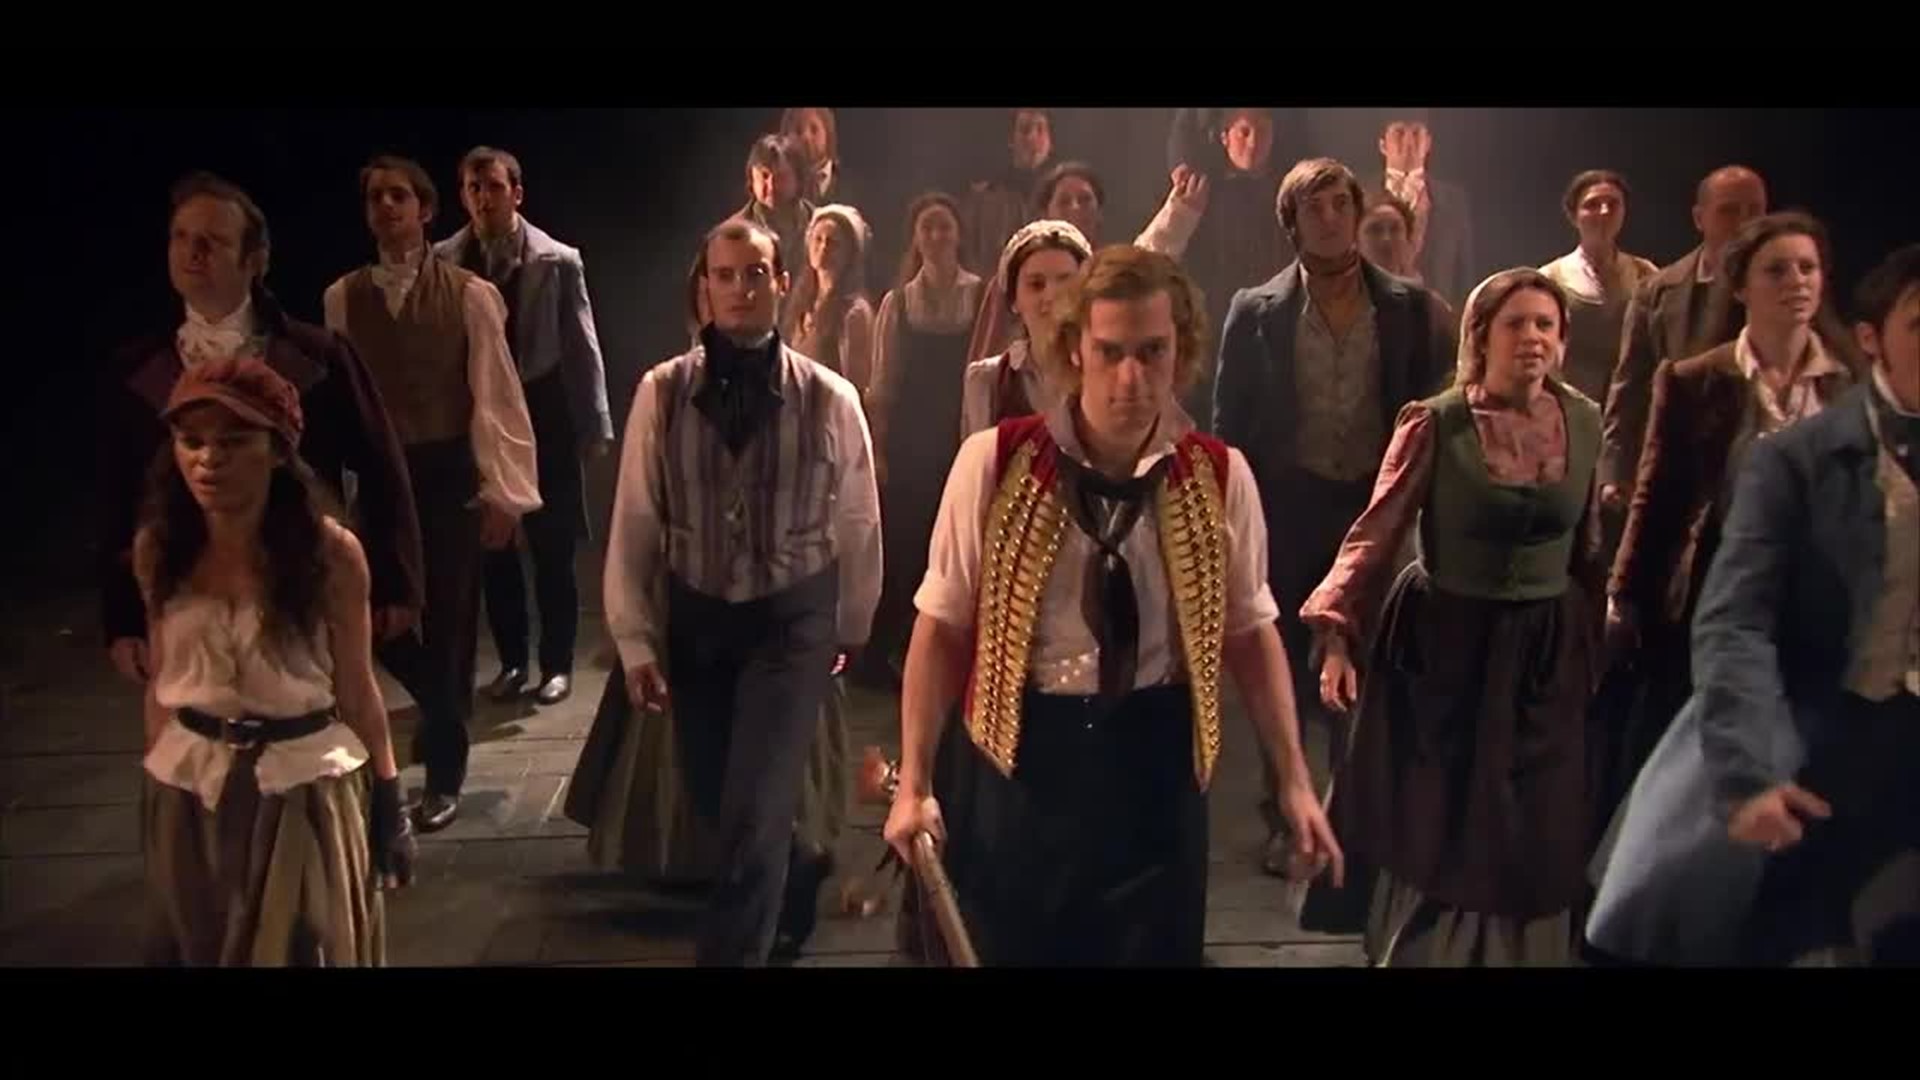 'Les Misérables’ – a Broadway spectacular right here the 419!